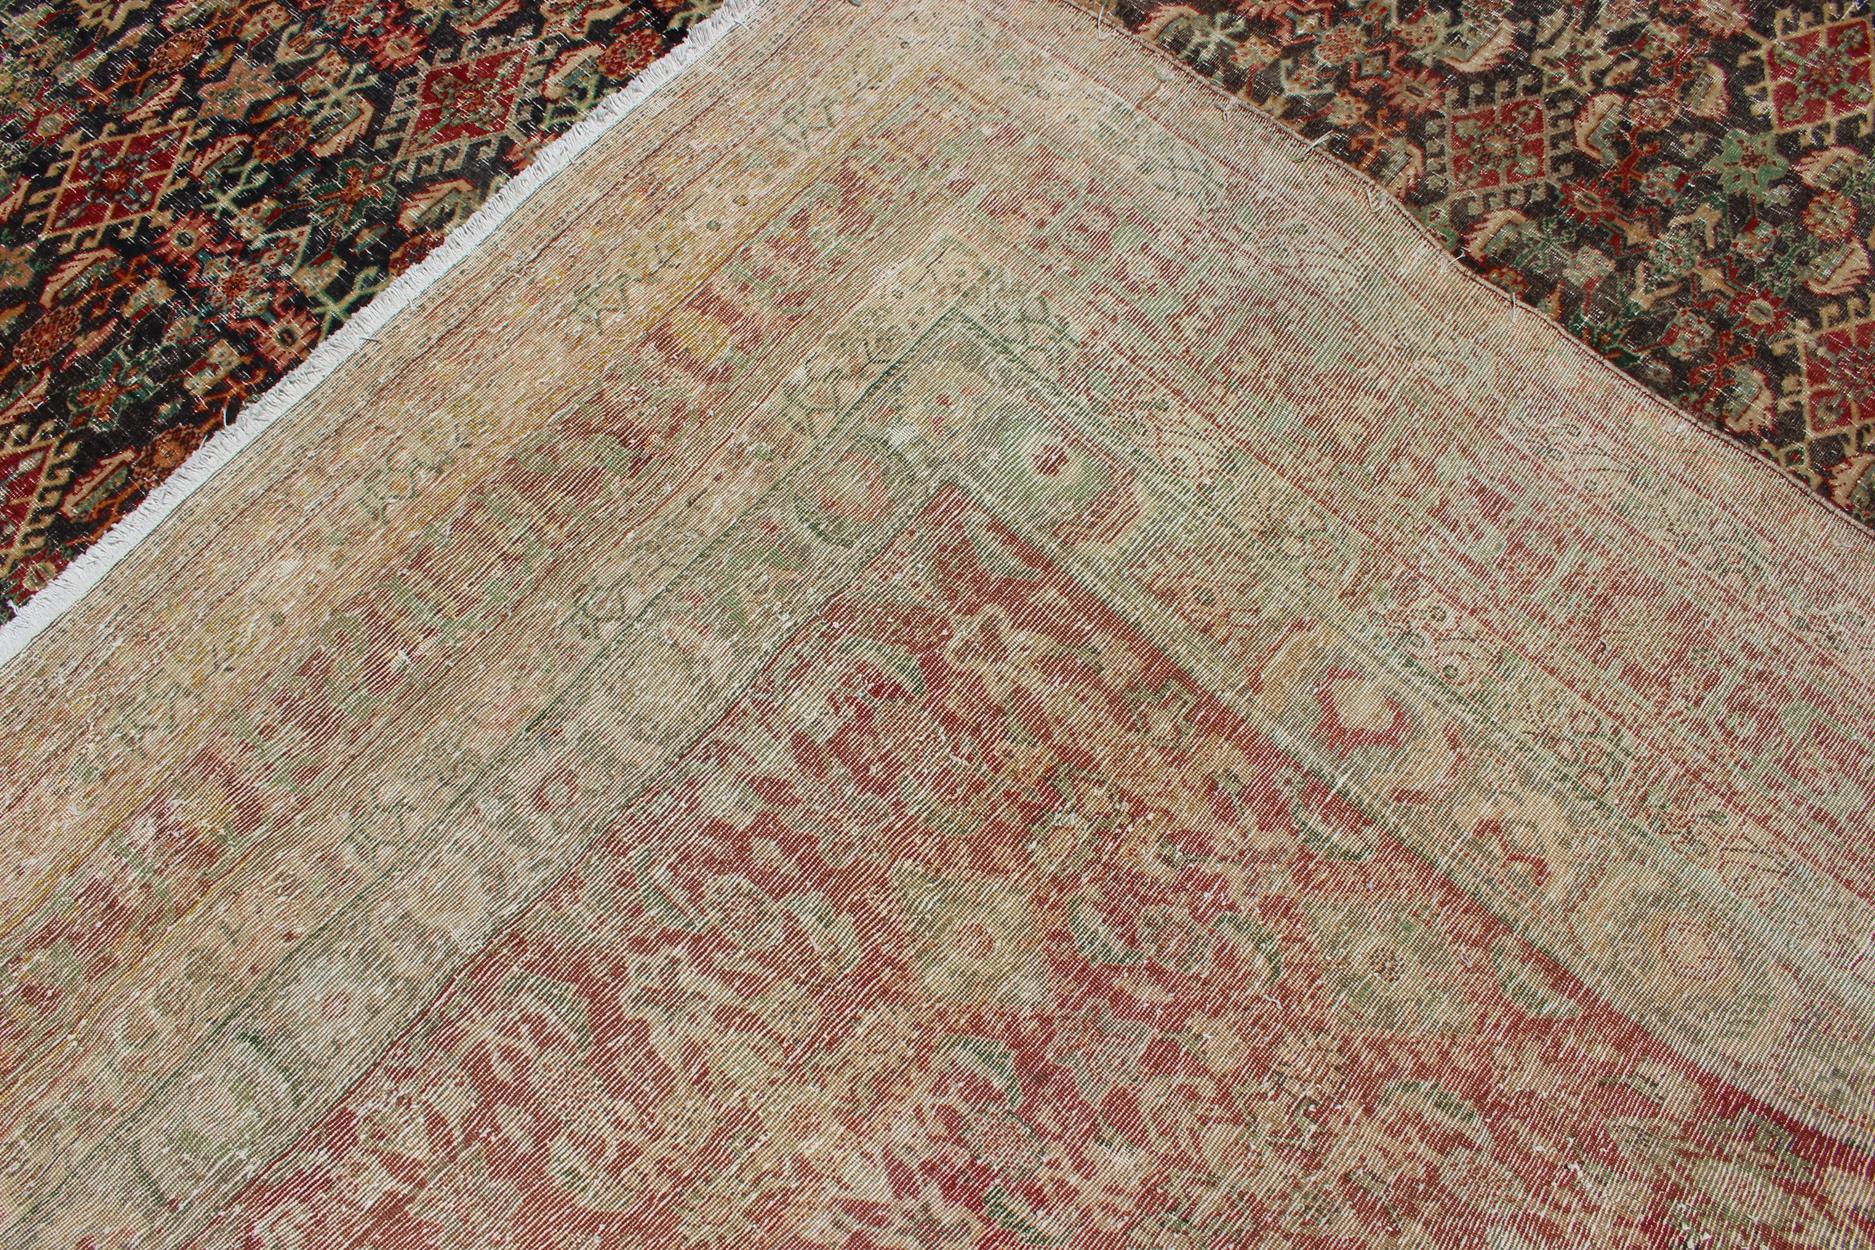 Colorful Large Persian Antique Qashqai rug with A Beautiful Tribal Motif Design For Sale 13